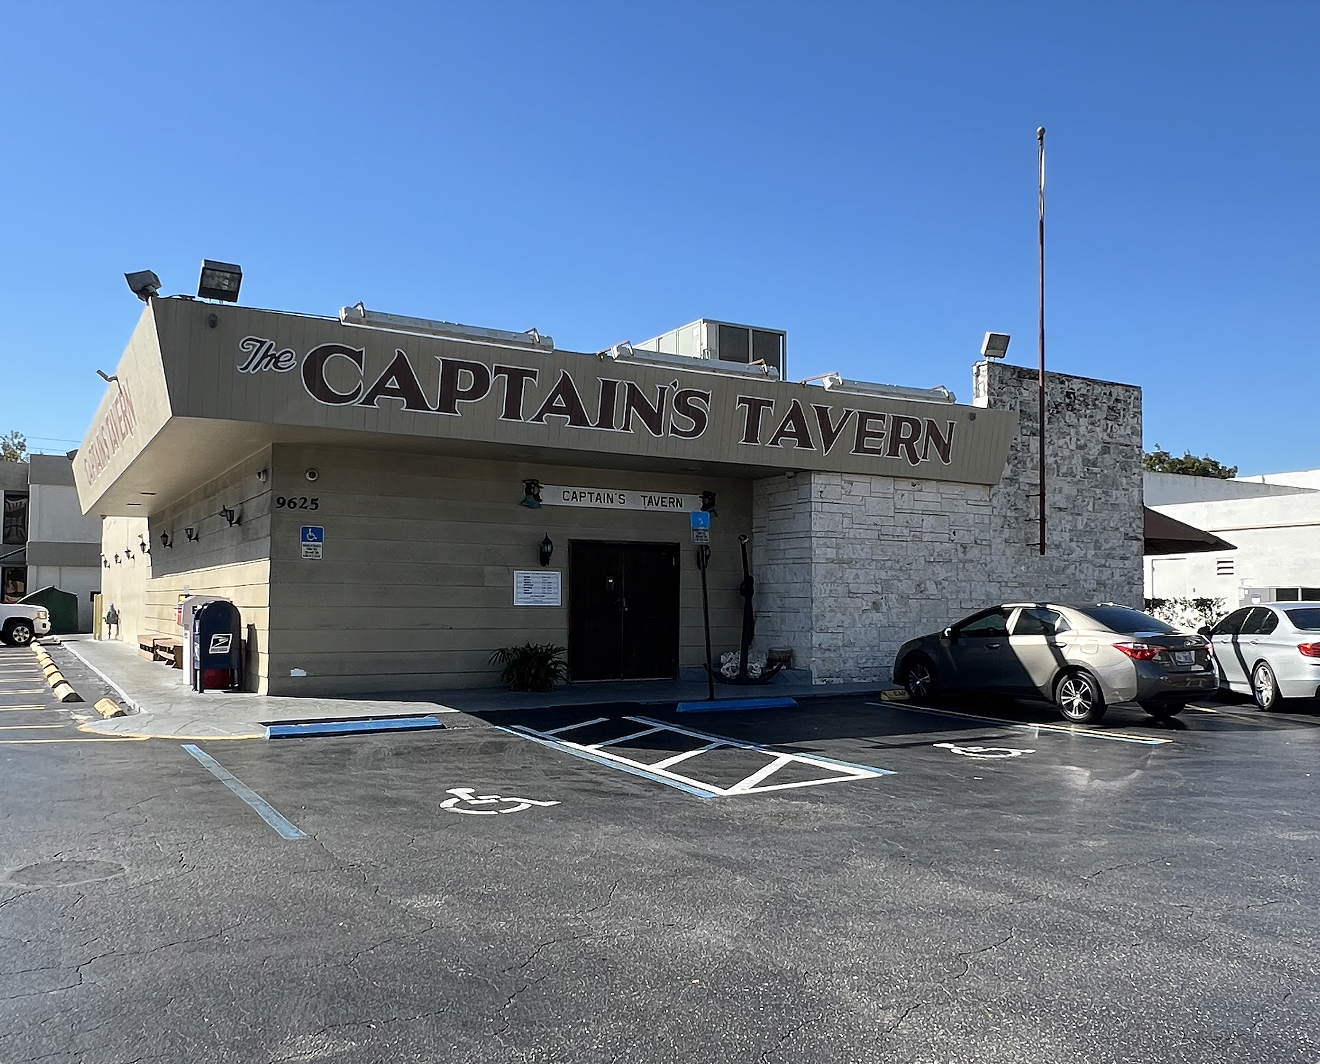 From its impeccably fresh seafood to its vast wine list, the Captain's Tavern, a family-run stalwart, is that scarcest of Miami restaurant sights: an institution.